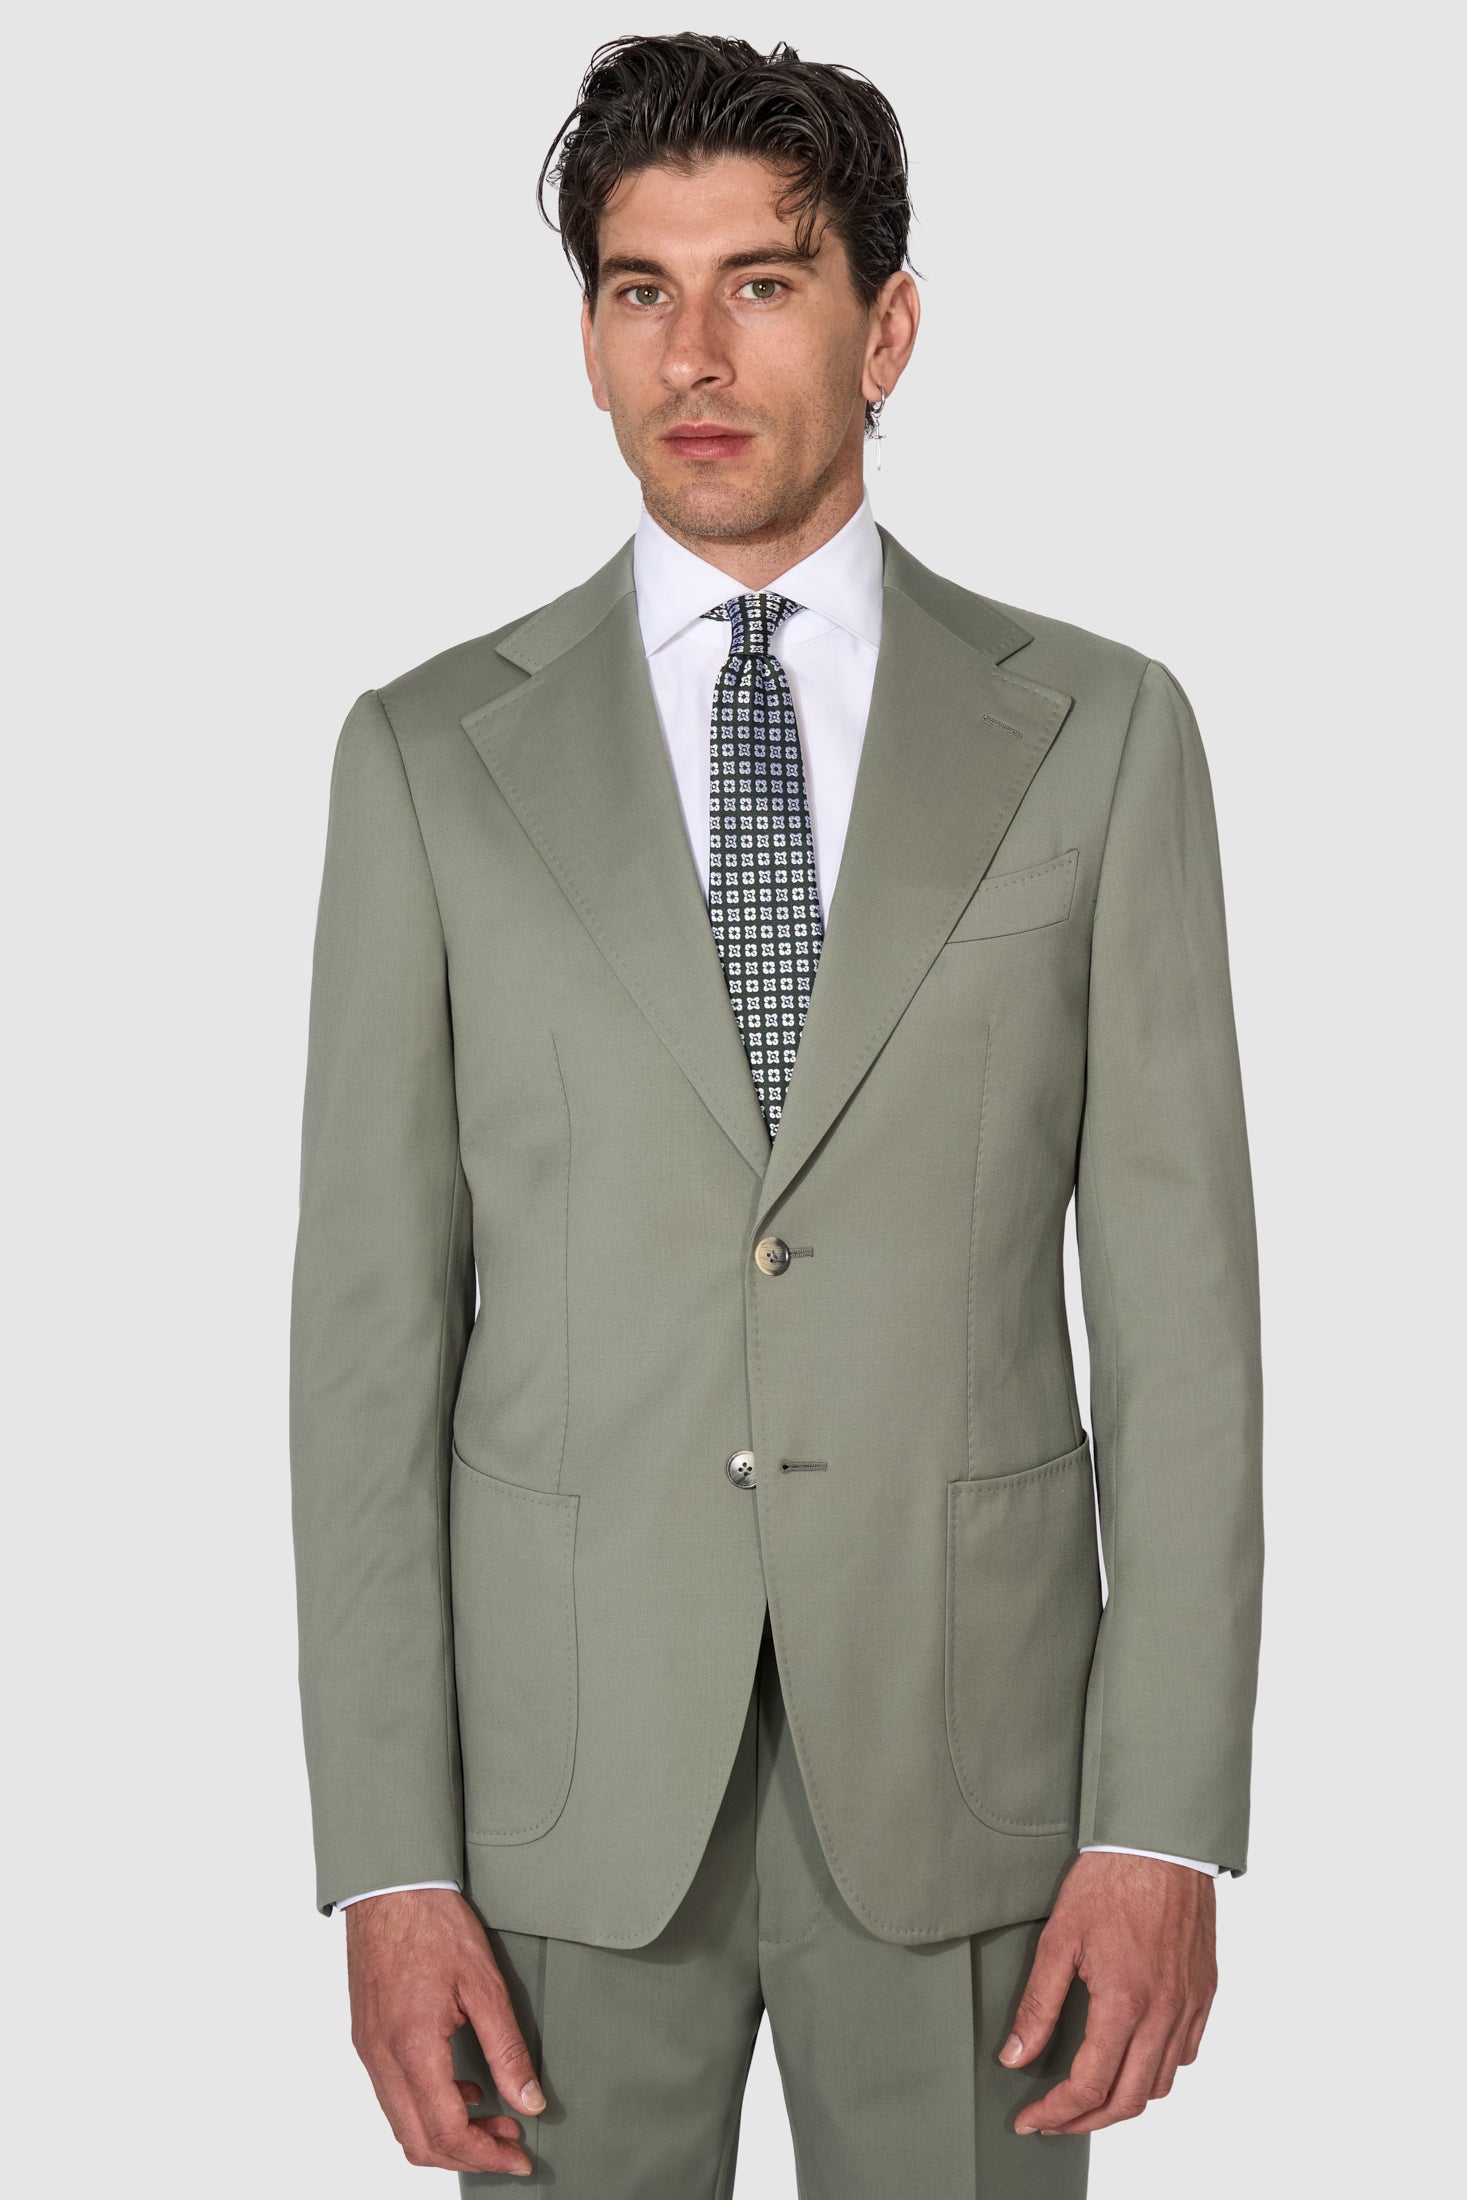 New Suitsupply Havana Light Green Pure Wool Super 110s All Season Wide Lapel Suit - Size 36R